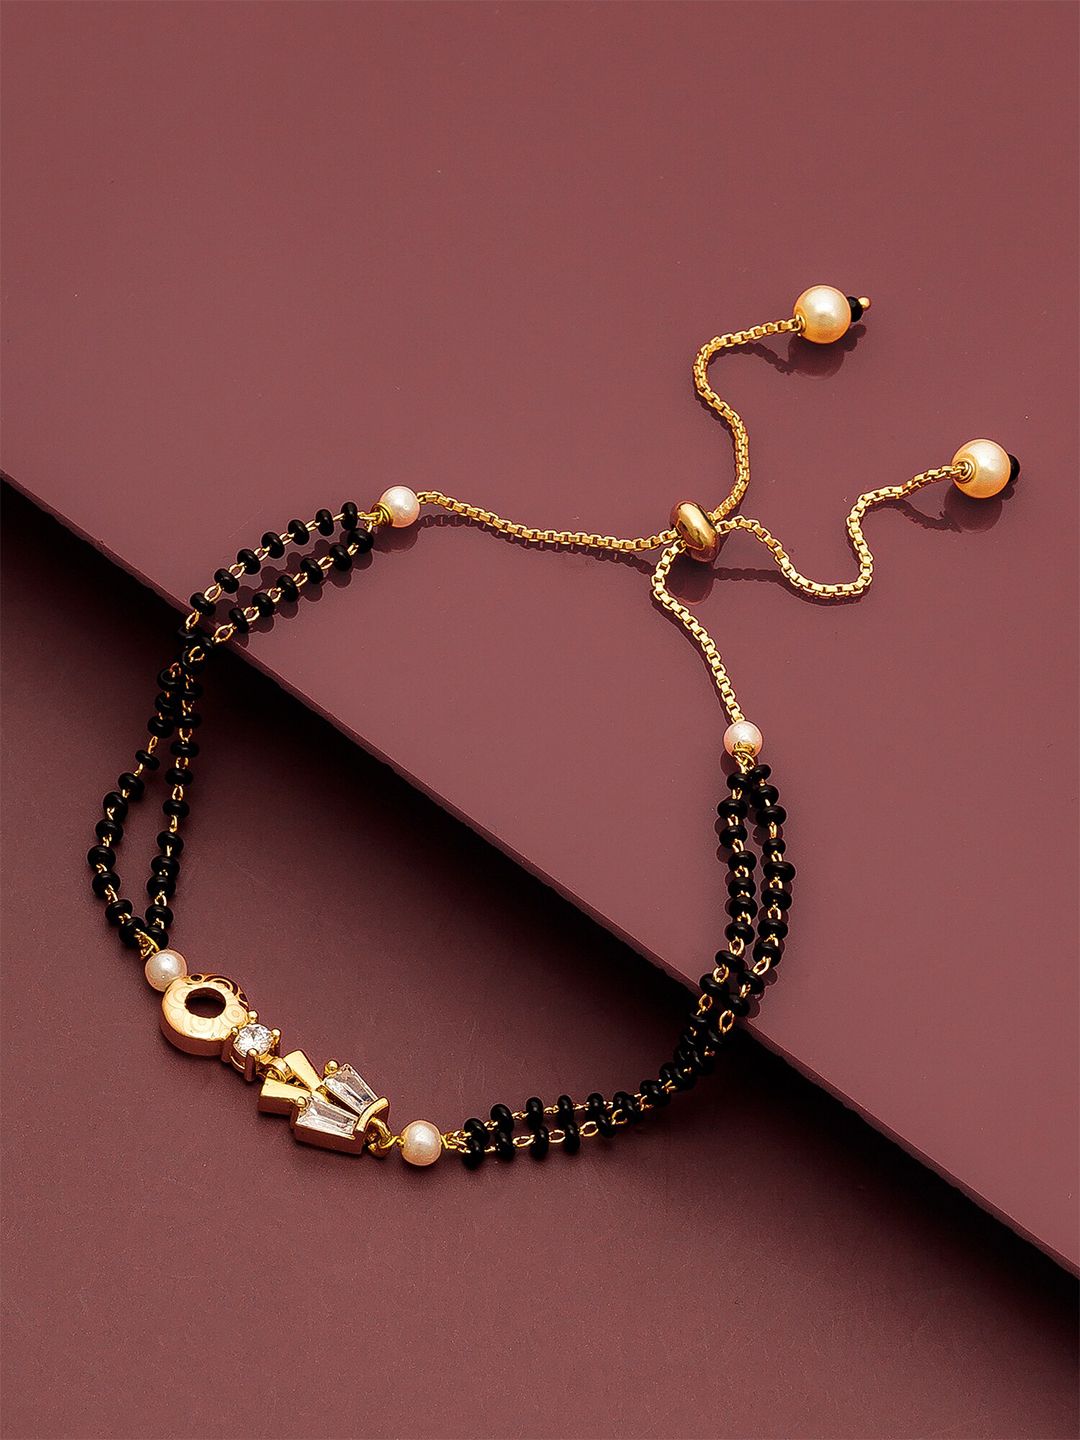 aadita Gold-Toned & Black Brass AD-Studded Gold-Plated Mangalsutra Link Bracelet Price in India